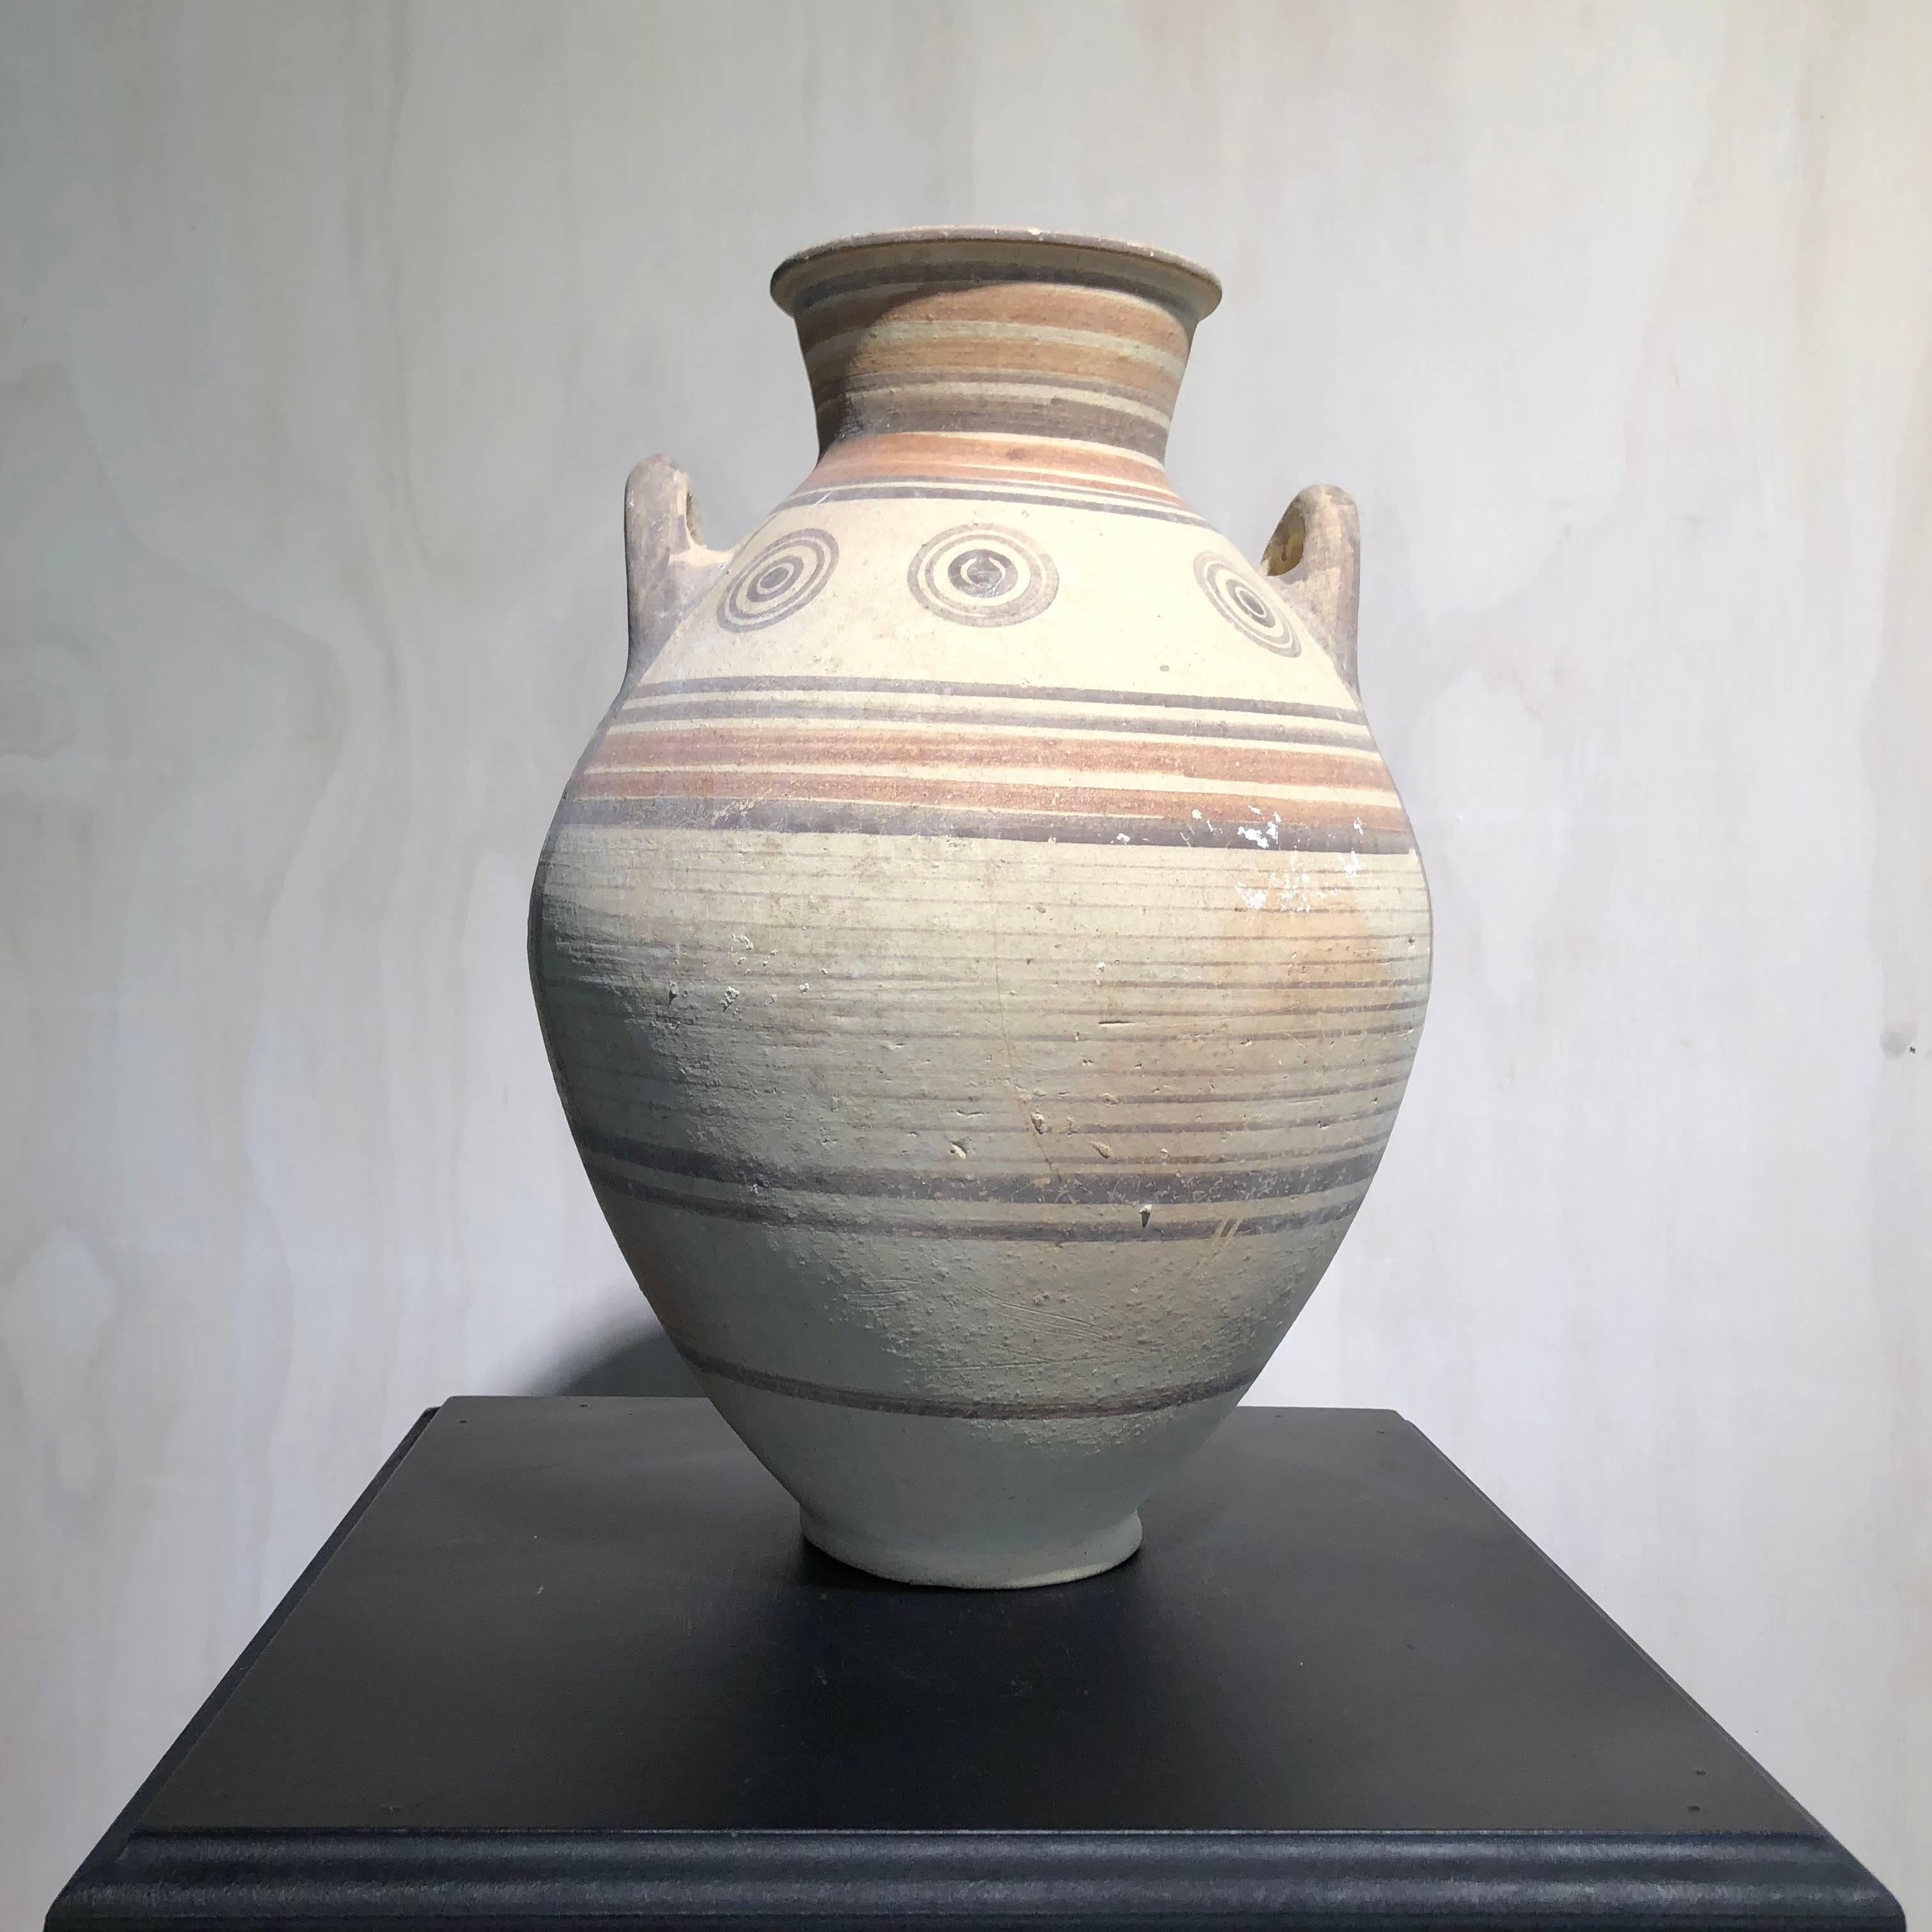 Cypriot Early Iron Age or Geometric Period Amphora, 1050-750 BC In Good Condition For Sale In Geelong, Victoria